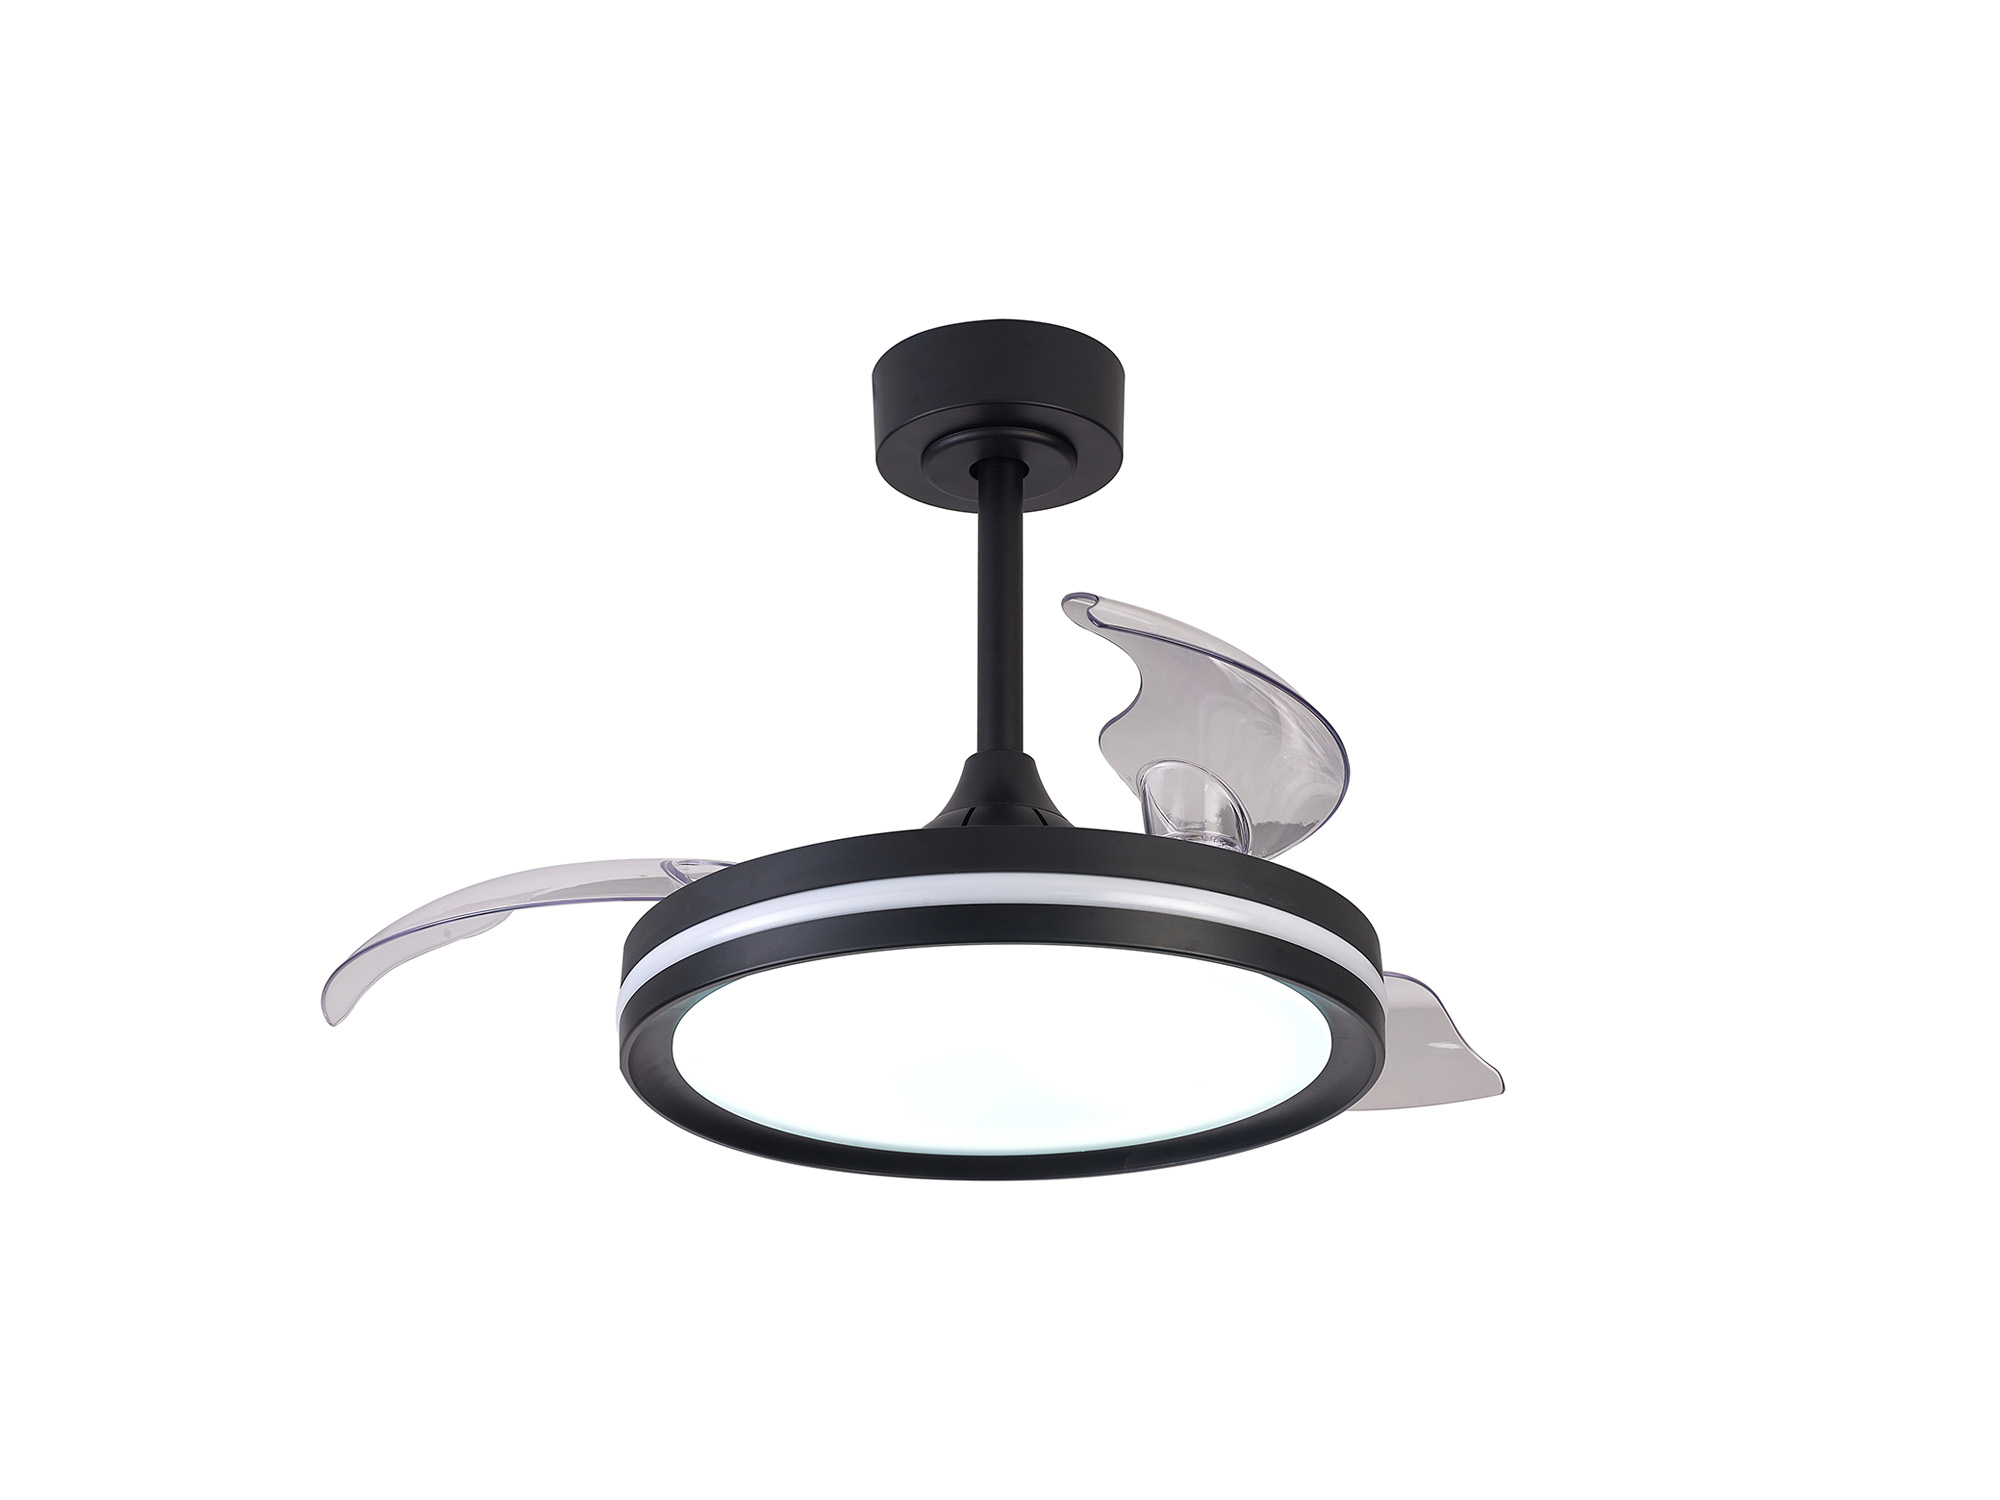 M8730  North 40W LED Dimmable White/RGB Ceiling Light With Built-In 28W DC Reversible Fan; Remote Control 3000-6500K; Black